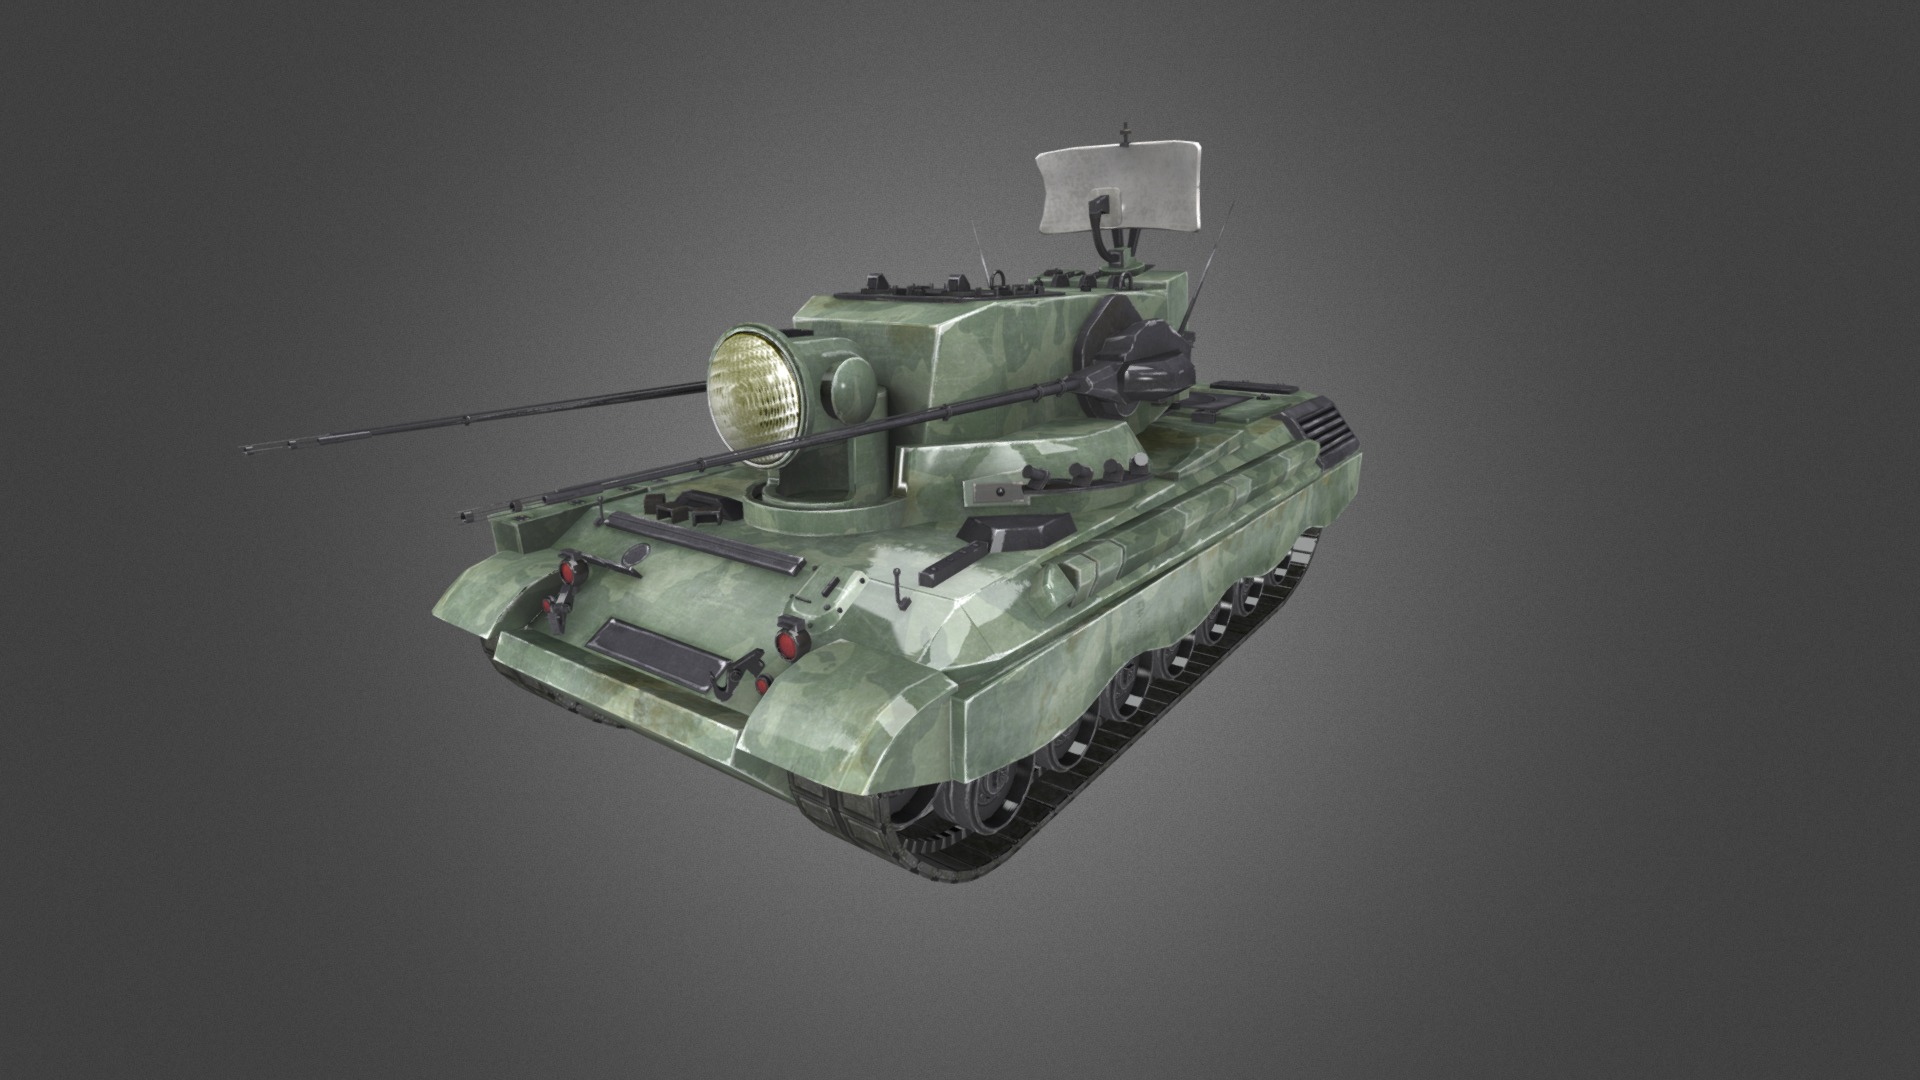 Game Ready low poly 3d model of Flakpanzer Gepard Tank

Download: http://gamedev.cgduck.pro - Flakpanzer Gepard Tank - 3D model by CG Duck (@cg_duck) 3d model